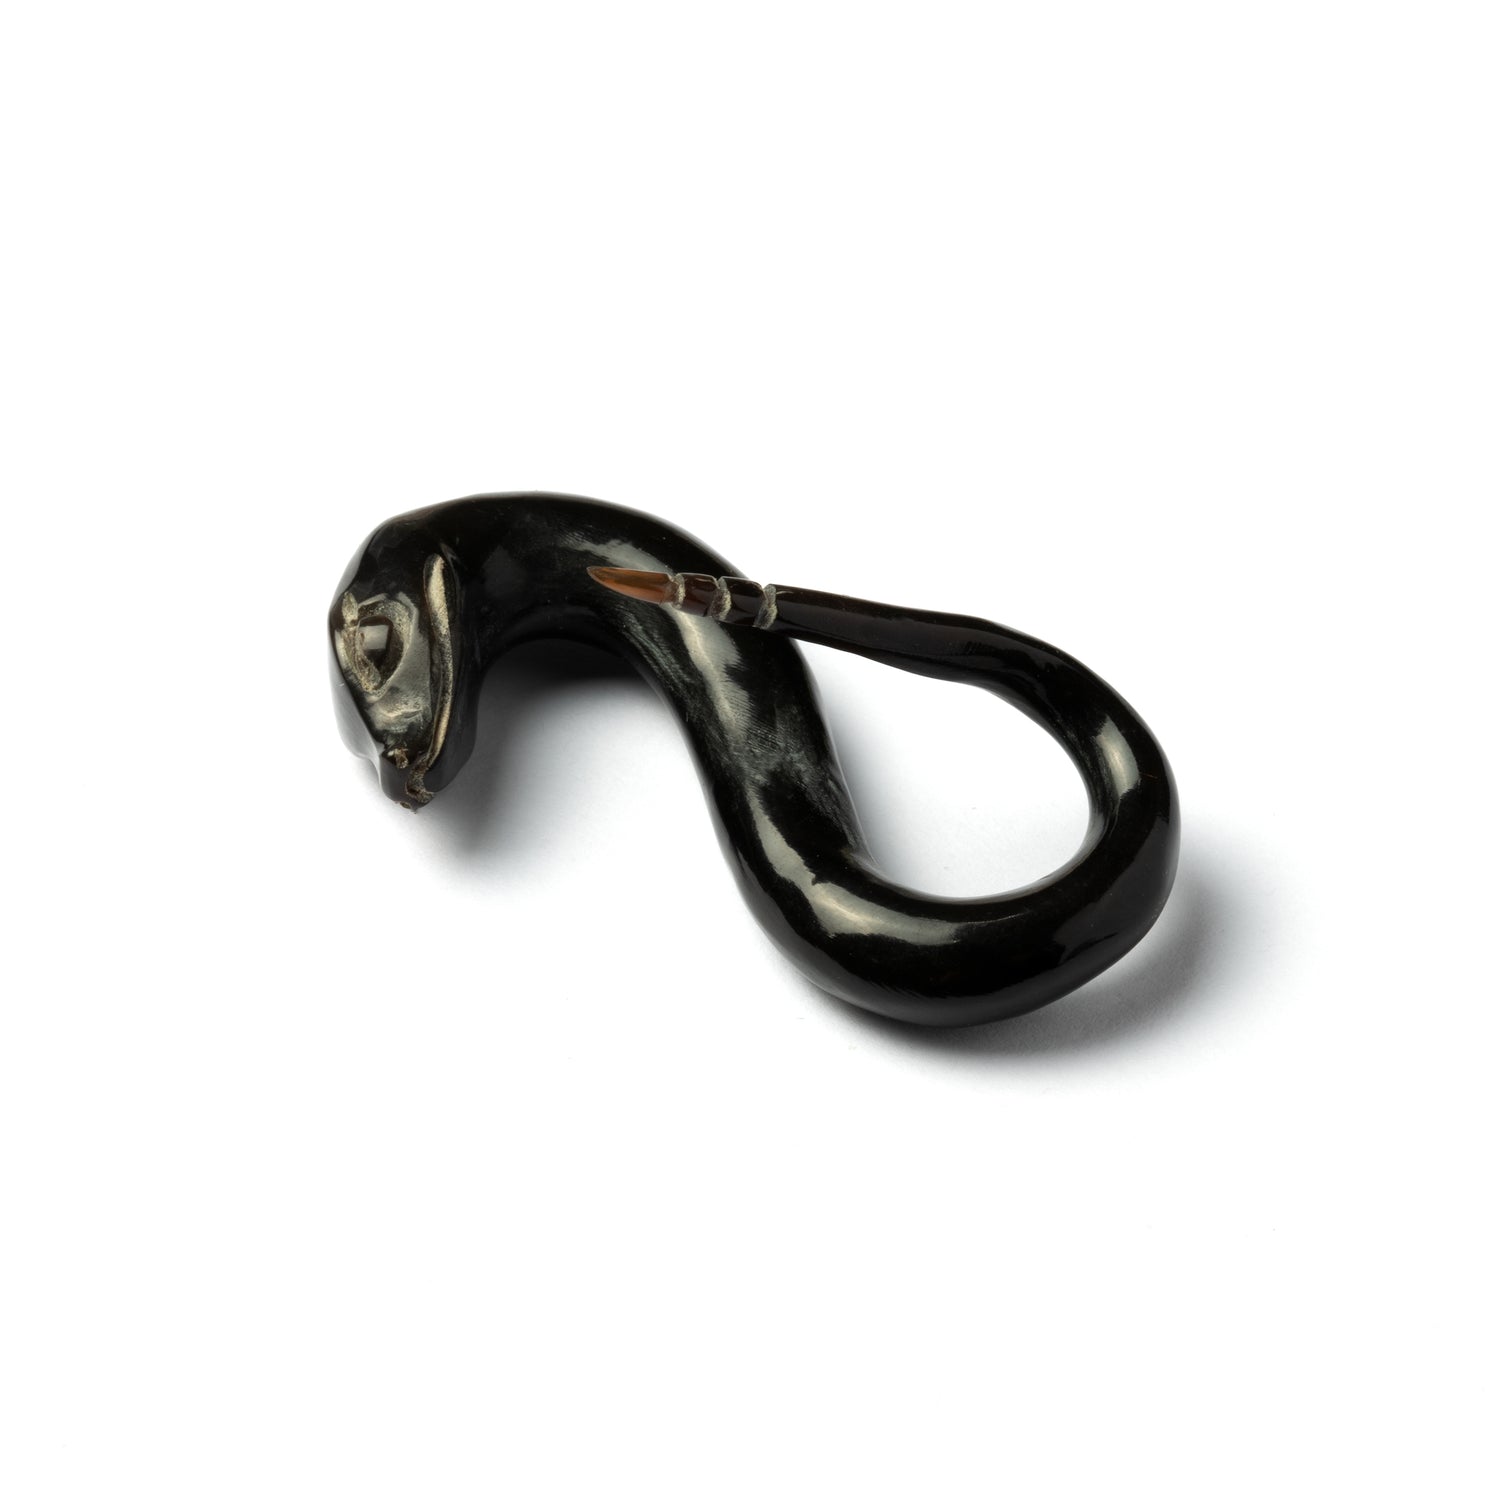 single horn snake ear stretcher in infinity shape right side view